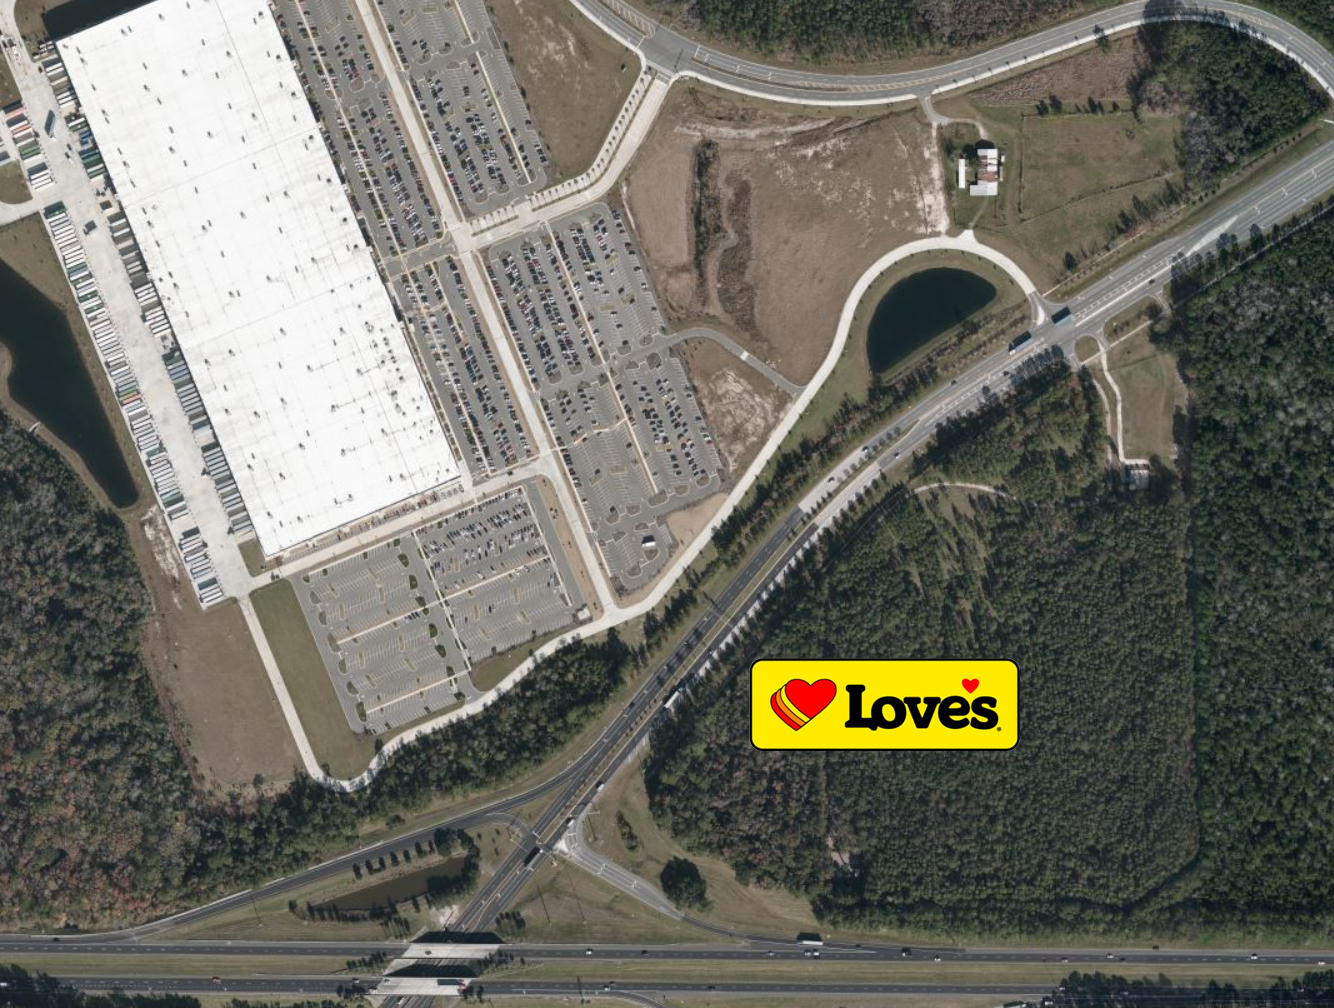 The  Love’s is across the street from the Amazon fulfillment center near Jacksonville International Airport.